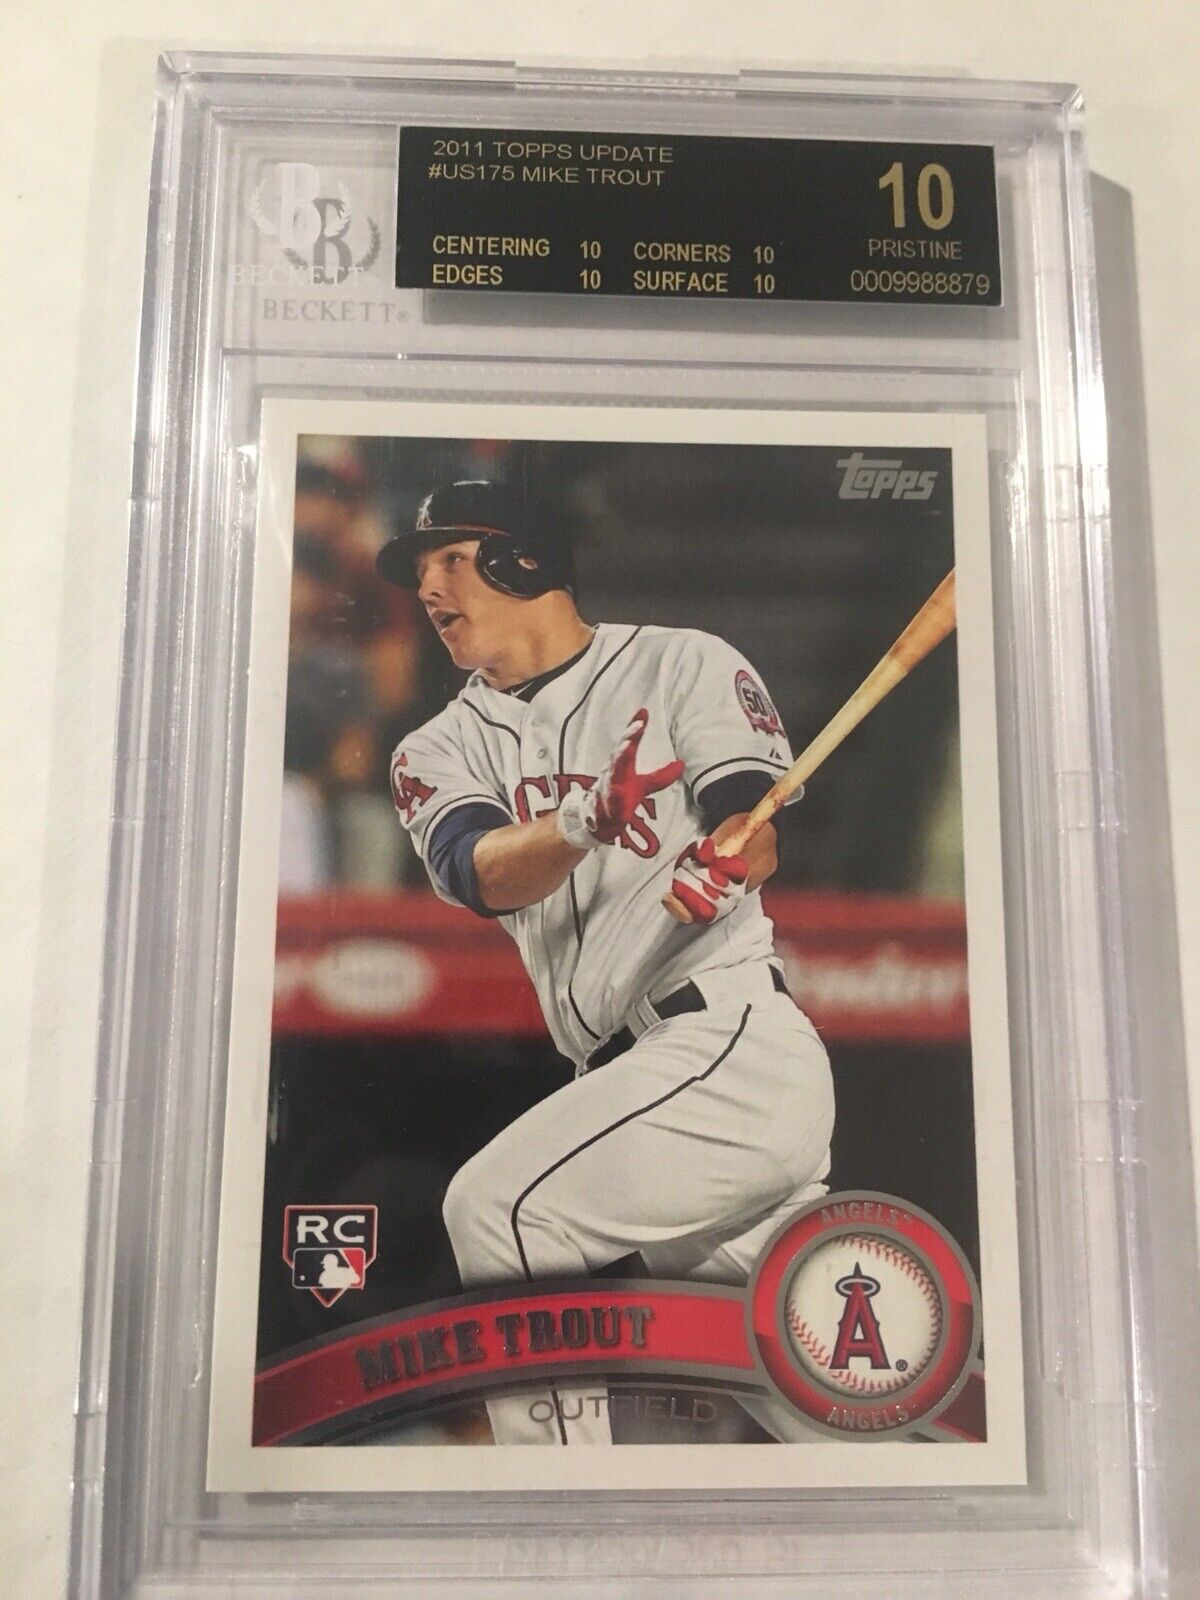 2011 Topps Update Mike Trout ROOKIE RC #US175 BGS 10 BLACK LABEL